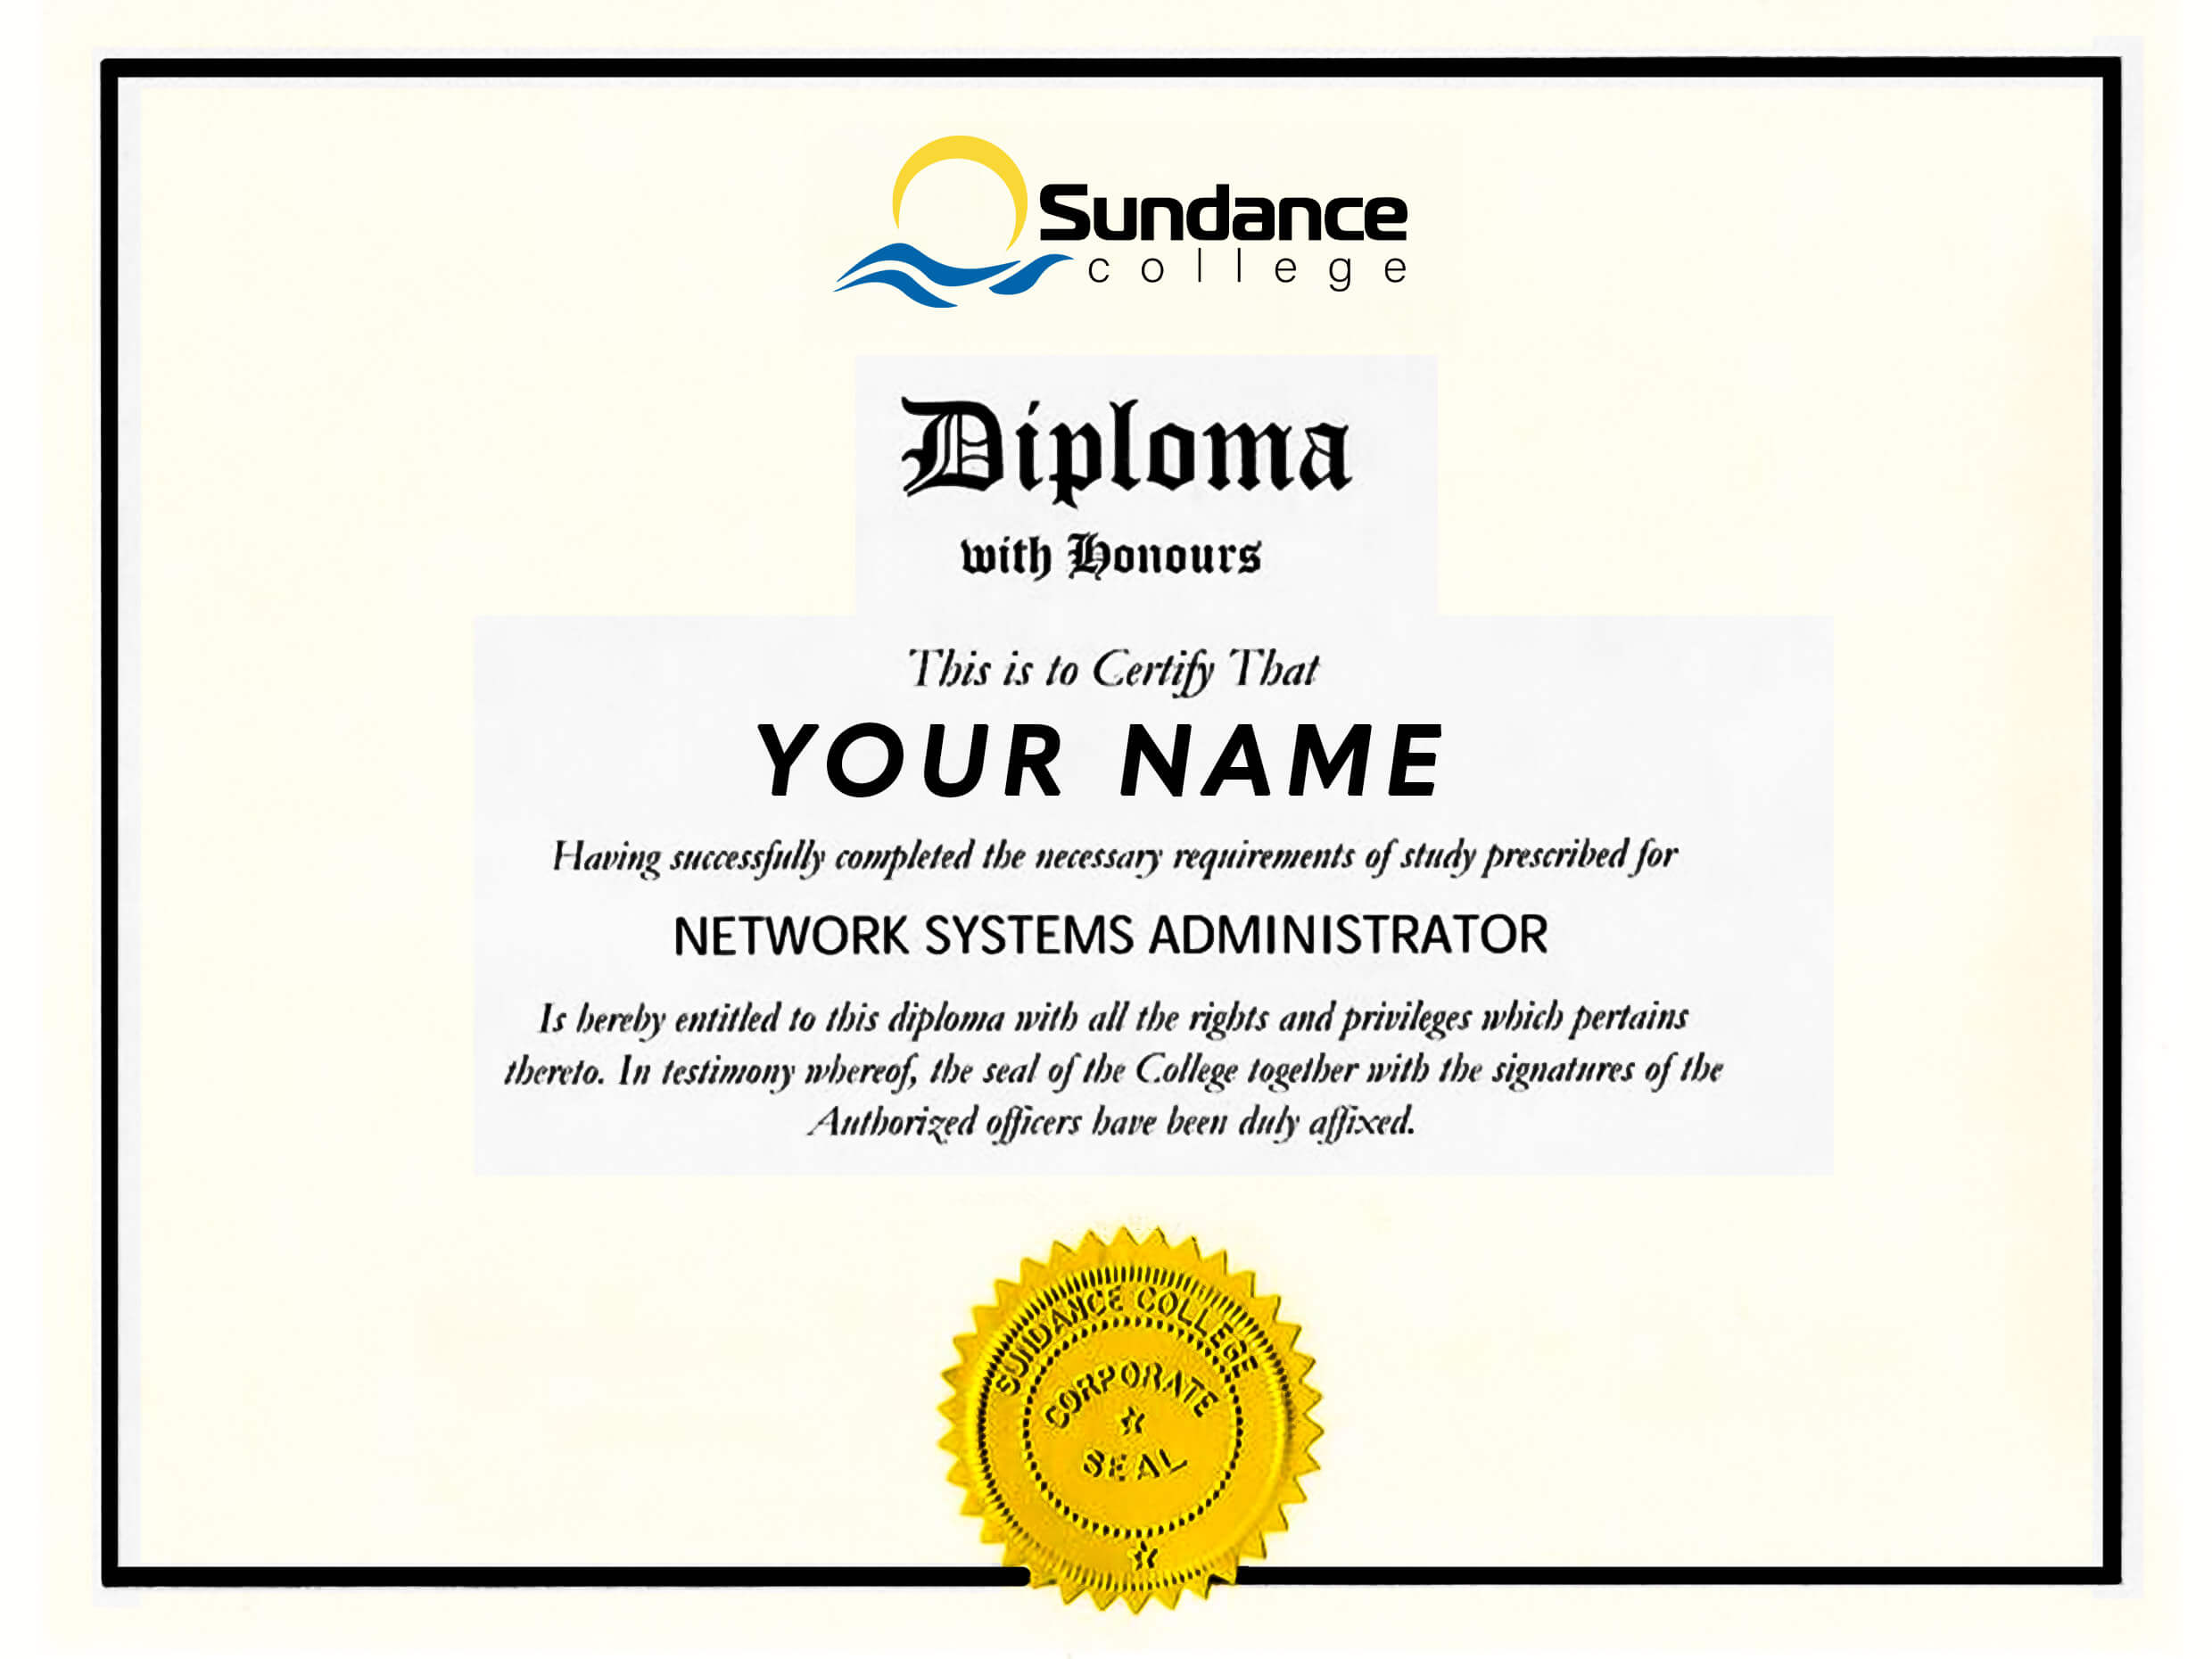 a sundance college network systems administration diploma with your name on it